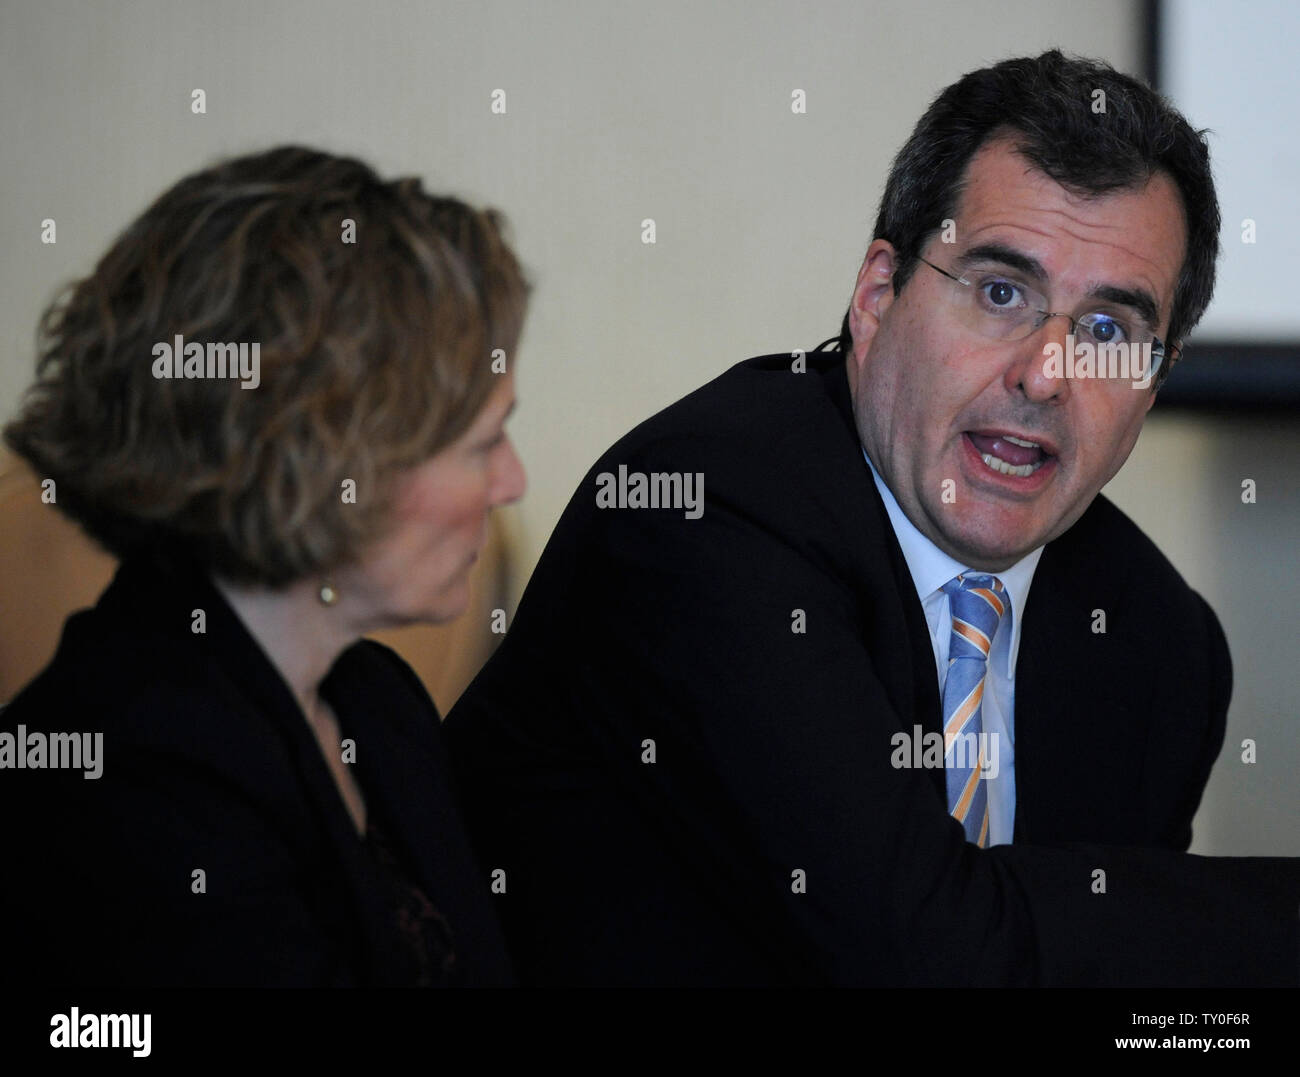 Laurie Rubiner, executive director, Malaria No More Policy Center (L) and Peter Chernin, president and COO of News Corporation participate in Eliminating Malaria: A Workshop at the 2008 Milken Institute Global Conference in Beverly Hills, California on April 29, 2008. (UPI Photo/Jim Ruymen) Stock Photo